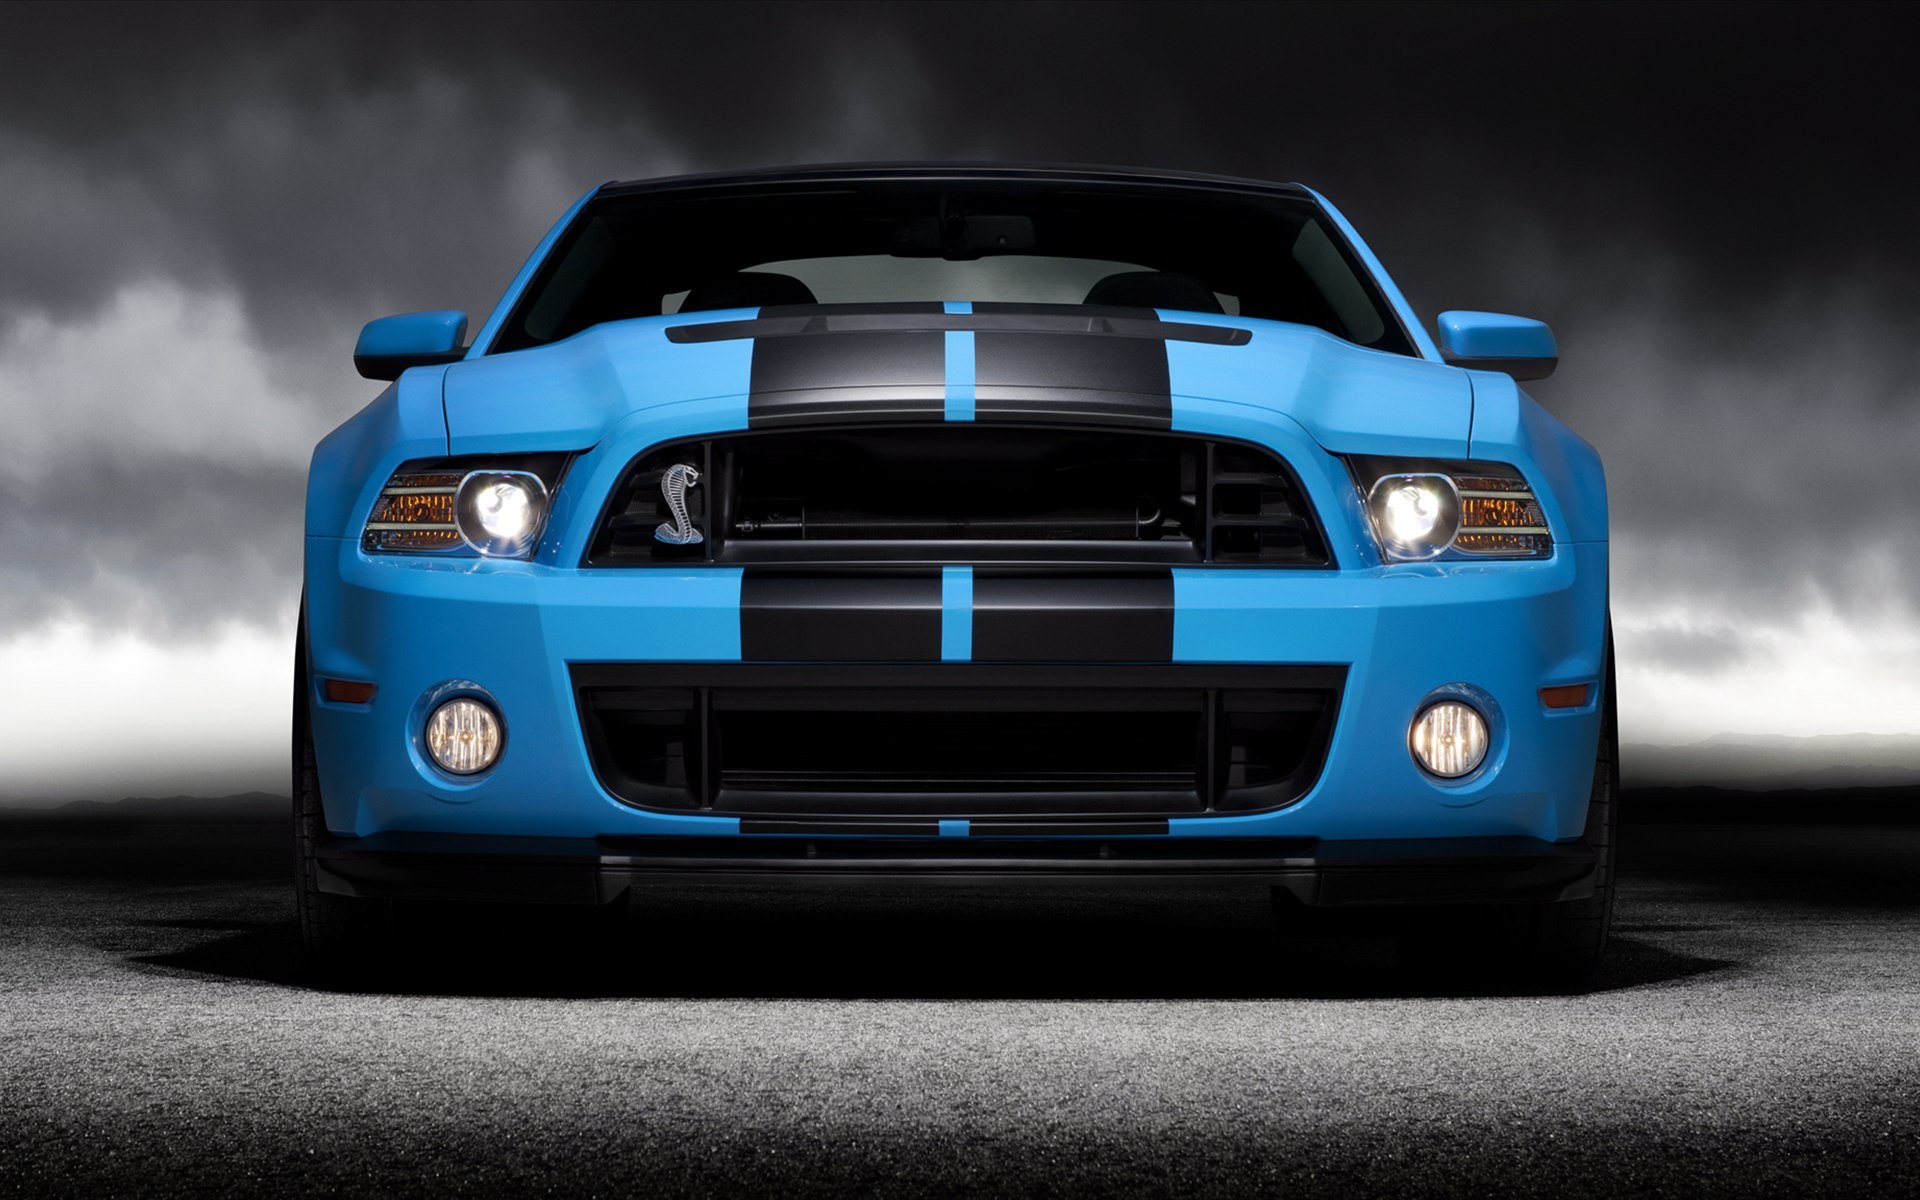 Ford Shelby GT500 2013 Wallpaper HD Car Wallpapers 1920x1200